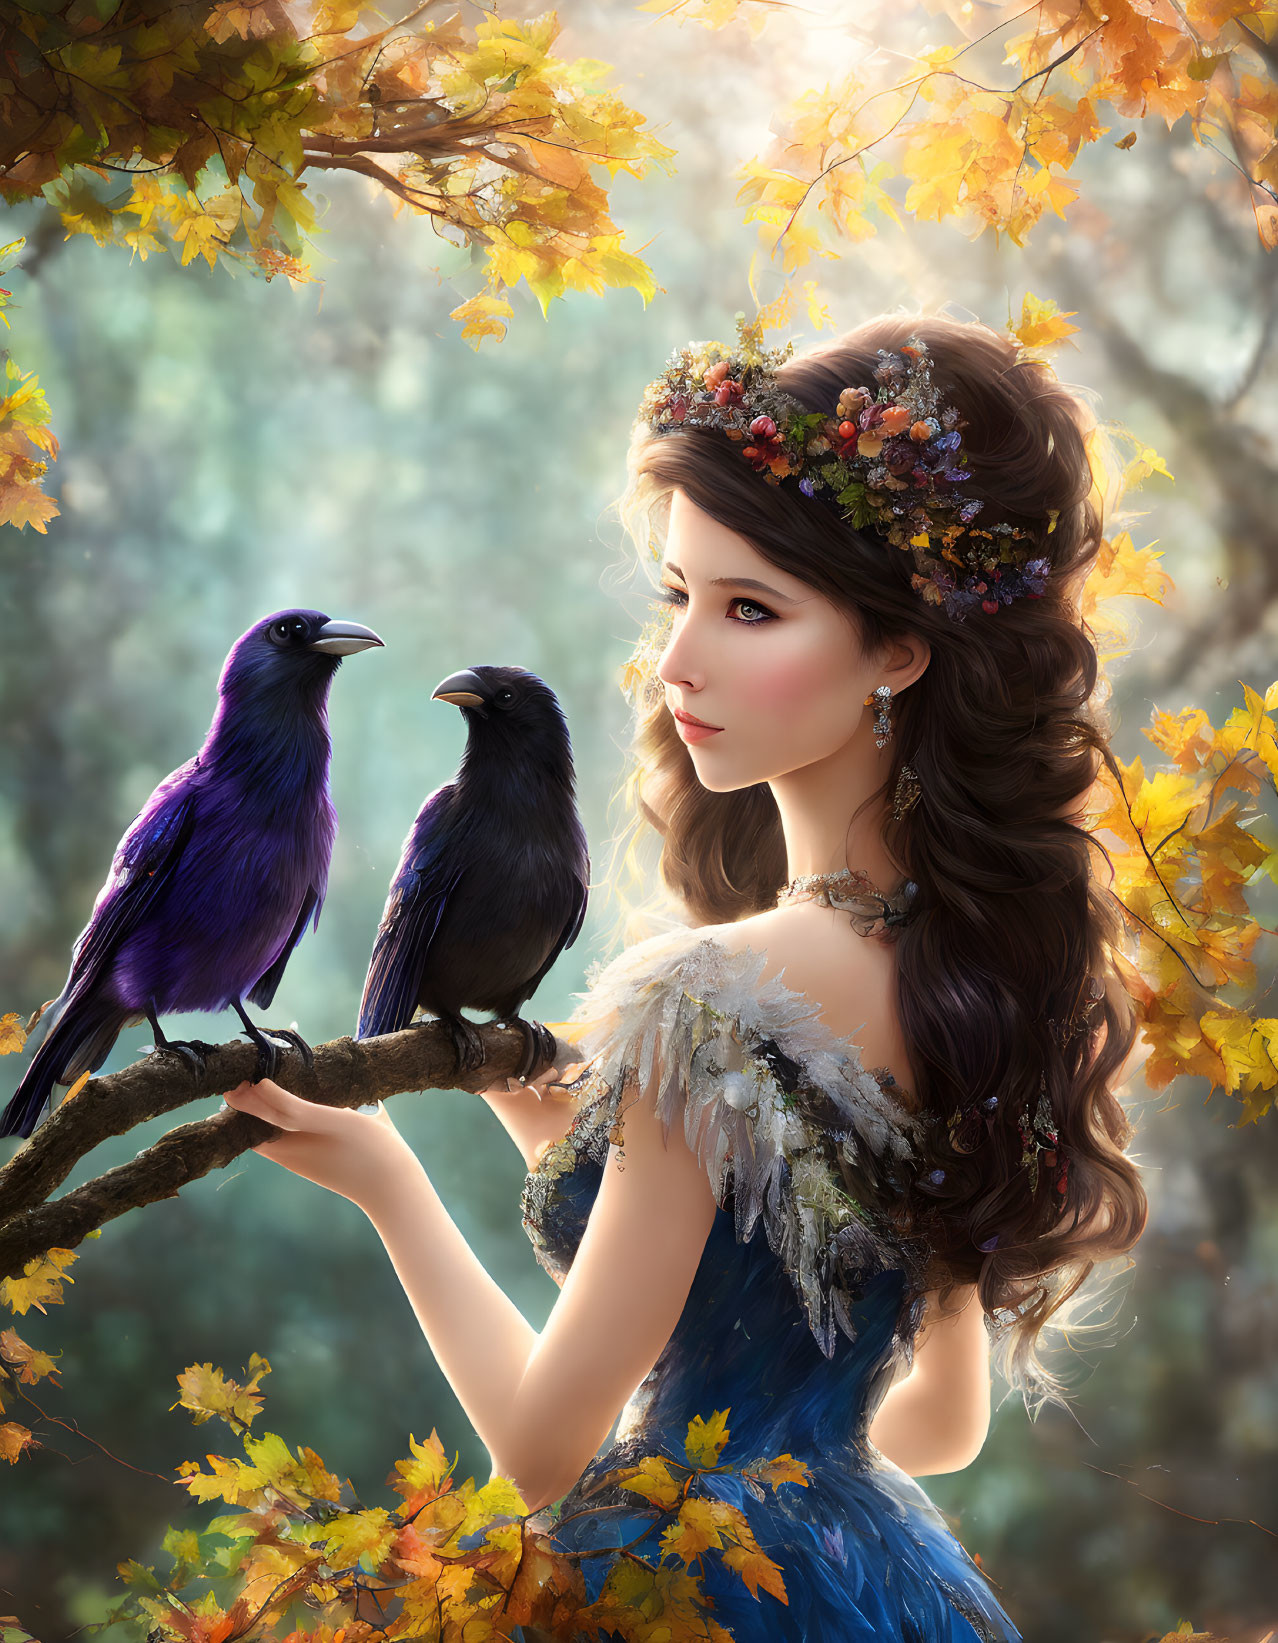 Woman in Blue Dress with Floral Crown Holding Branch with Ravens in Autumnal Setting